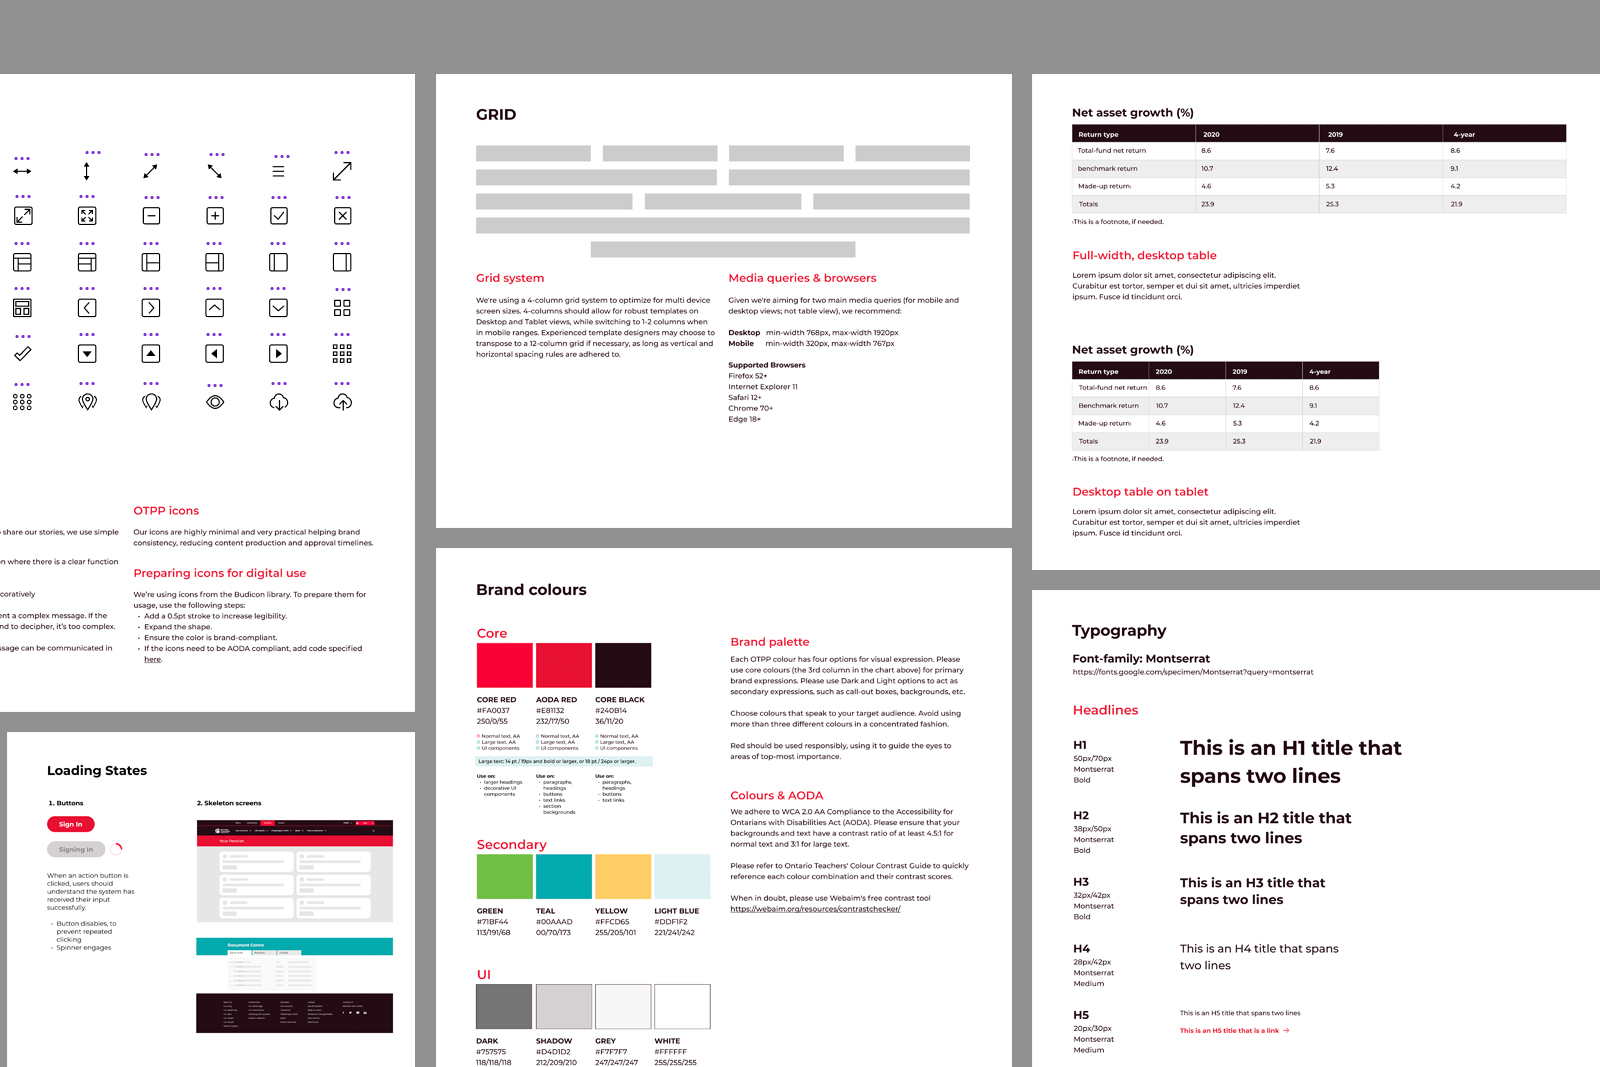 Atomic design guidelines to inform the larger UI UX